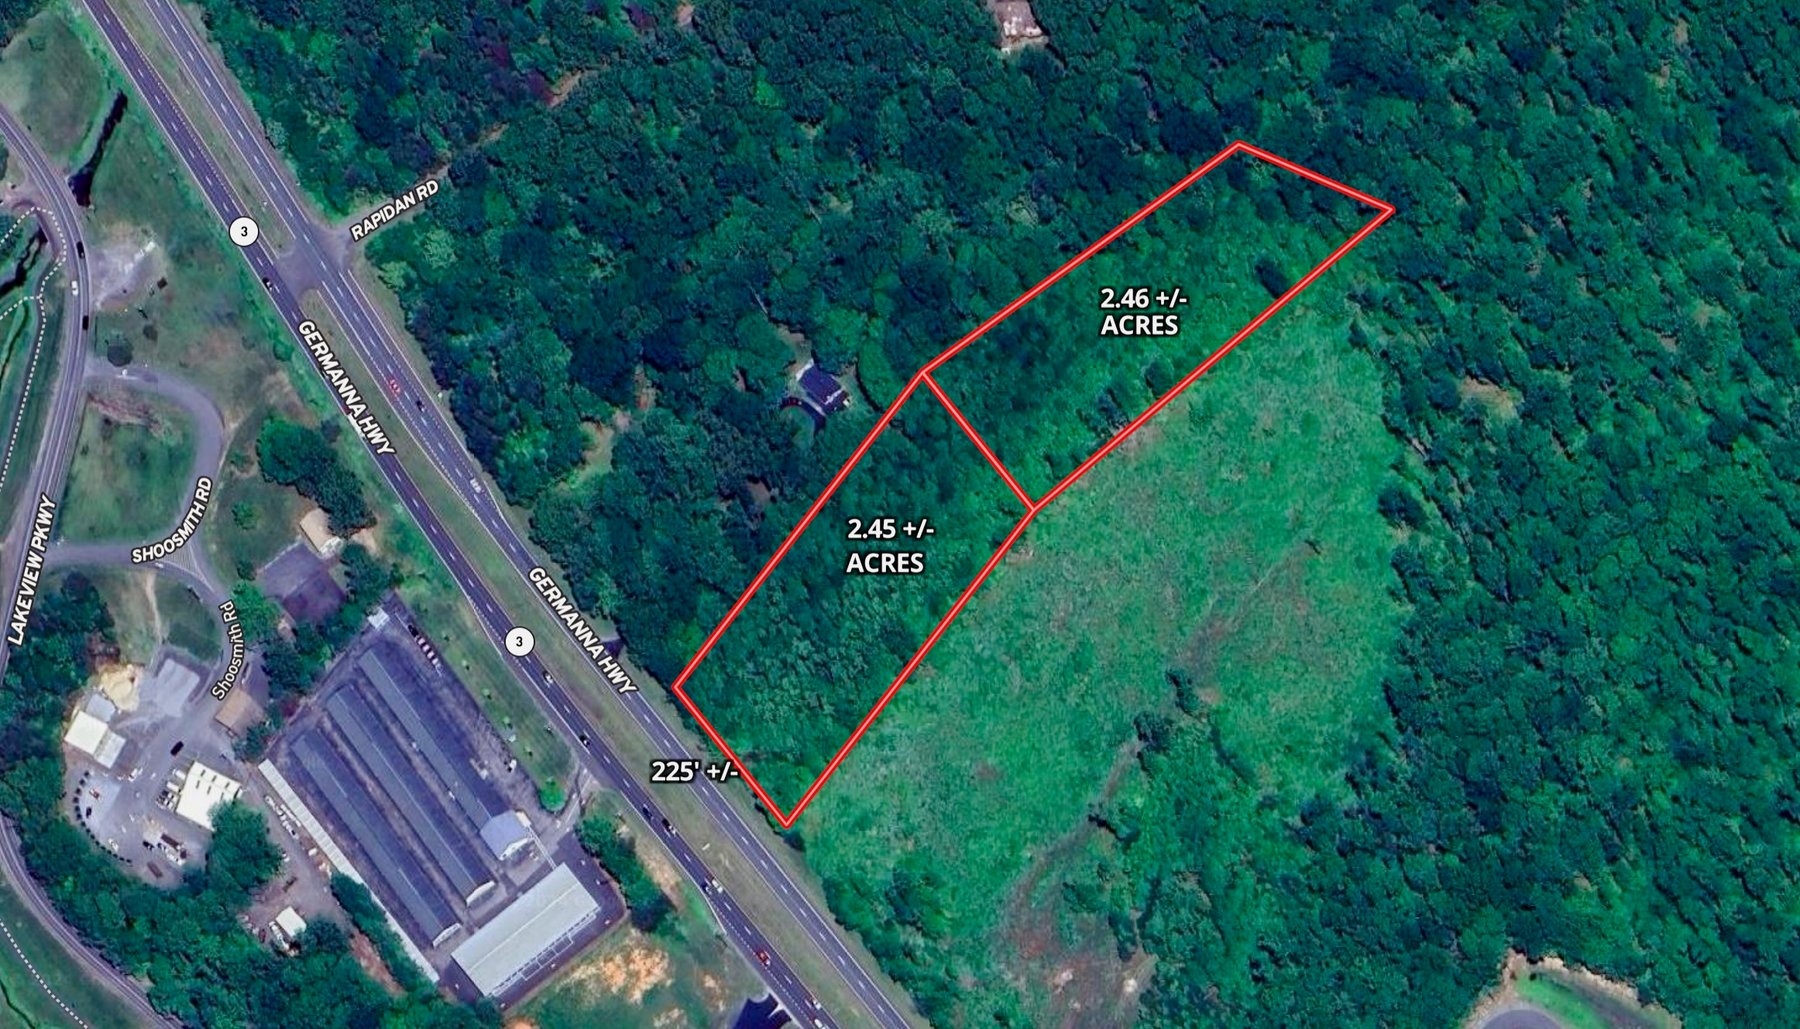 Image for 2 Commercially Zoned Land Parcels Totaling 4.9 +/- Acres Fronting Rt. 3 in Orange County, VA--ONLINE ONLY BIDDING!!